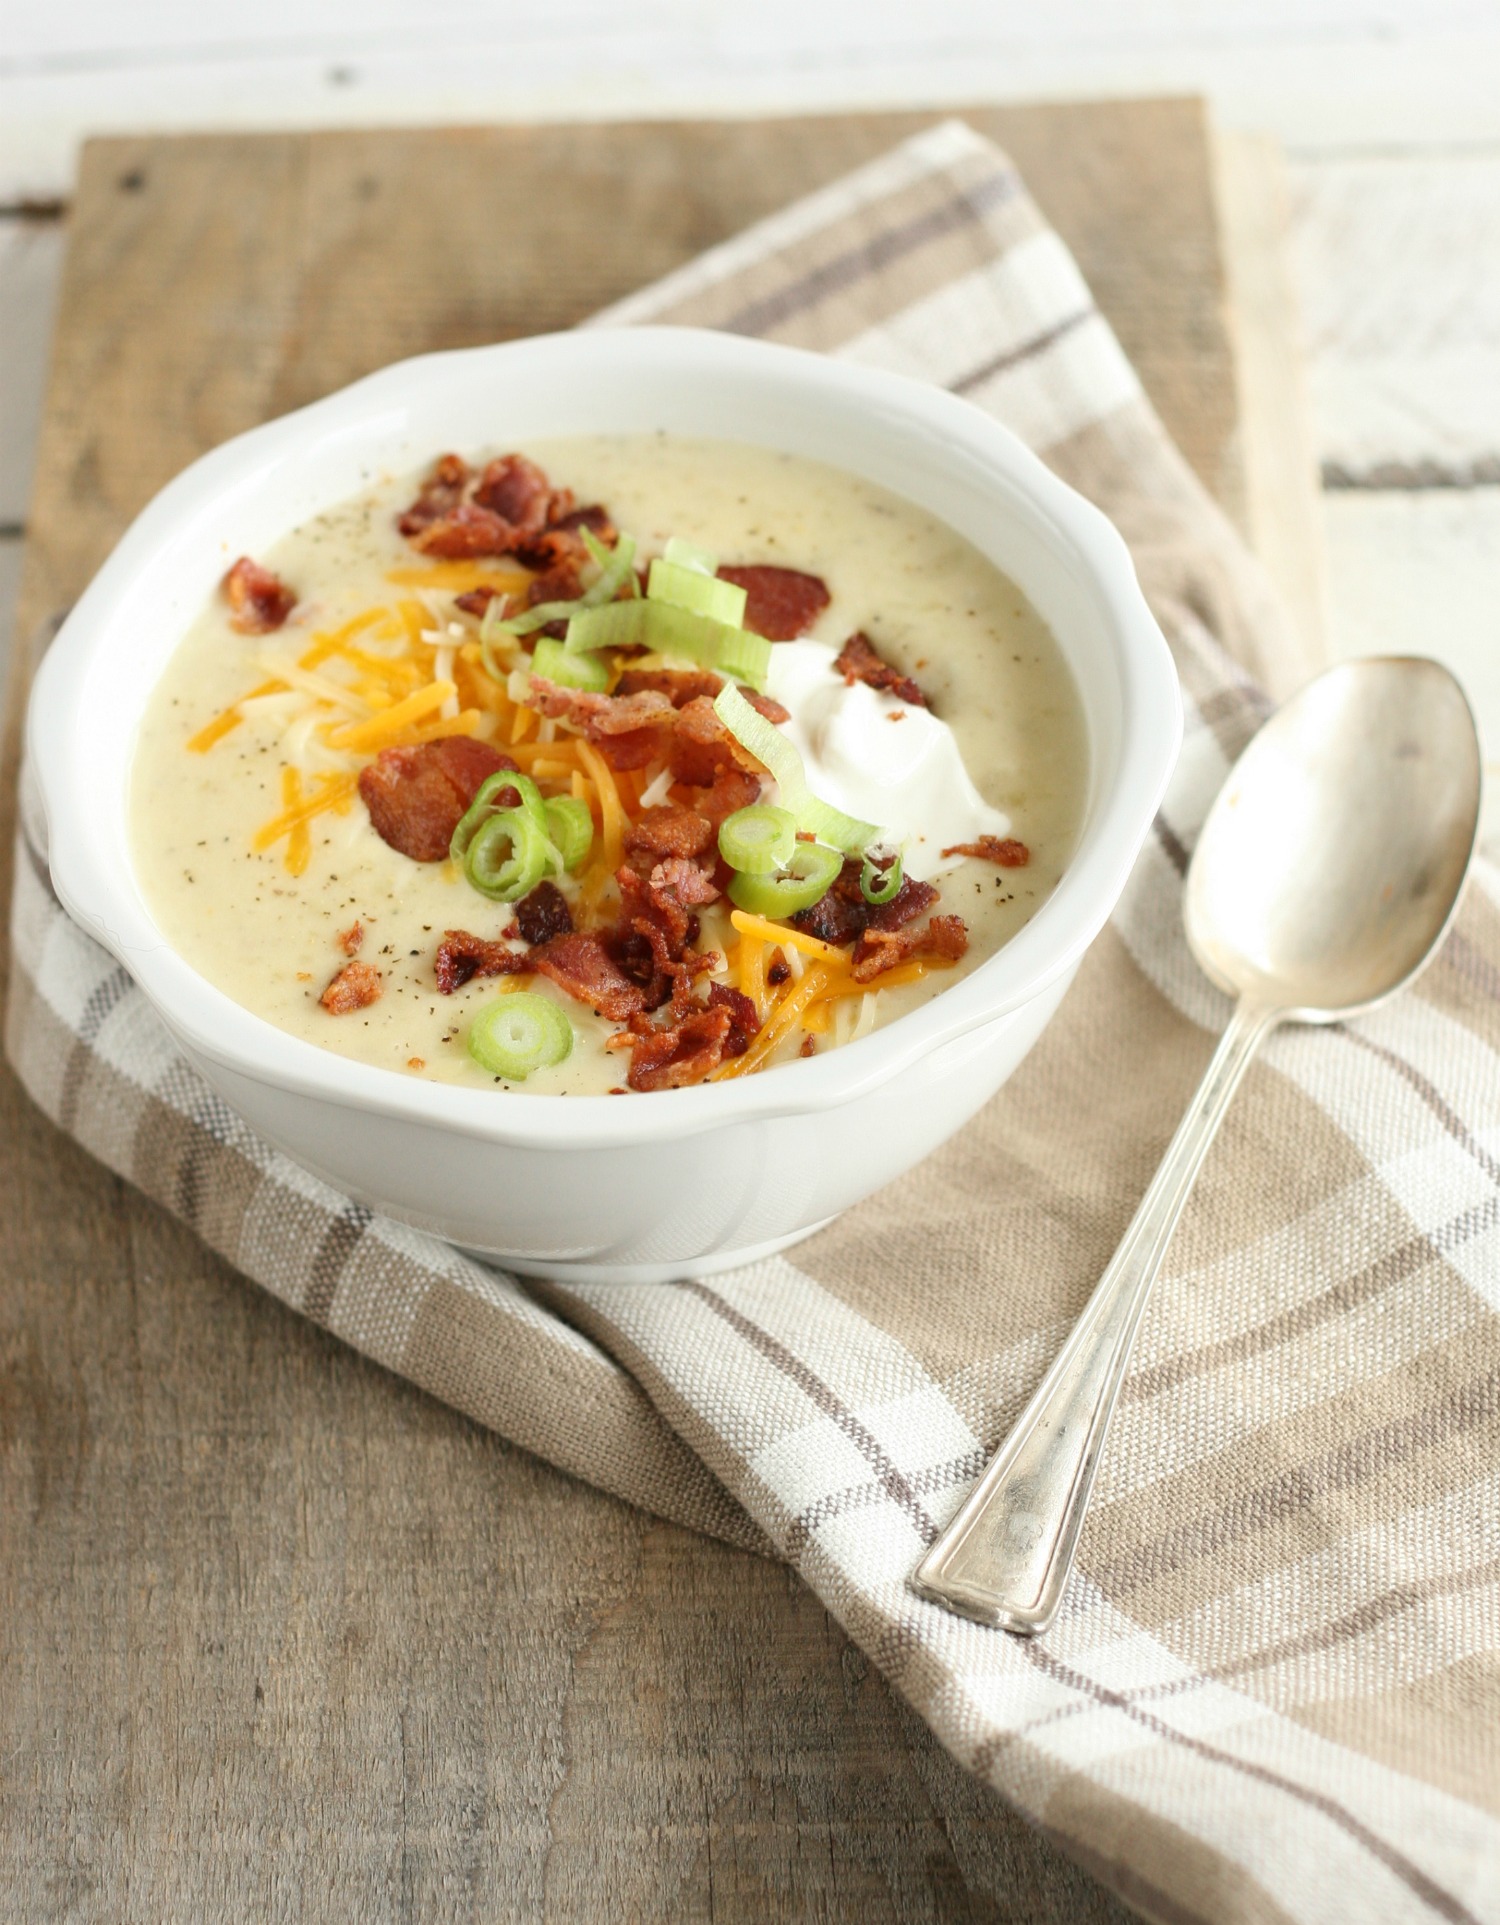 Potato soup in a white bowl with crumbled bacon, sour cream, shredded cheese, and green onion slices